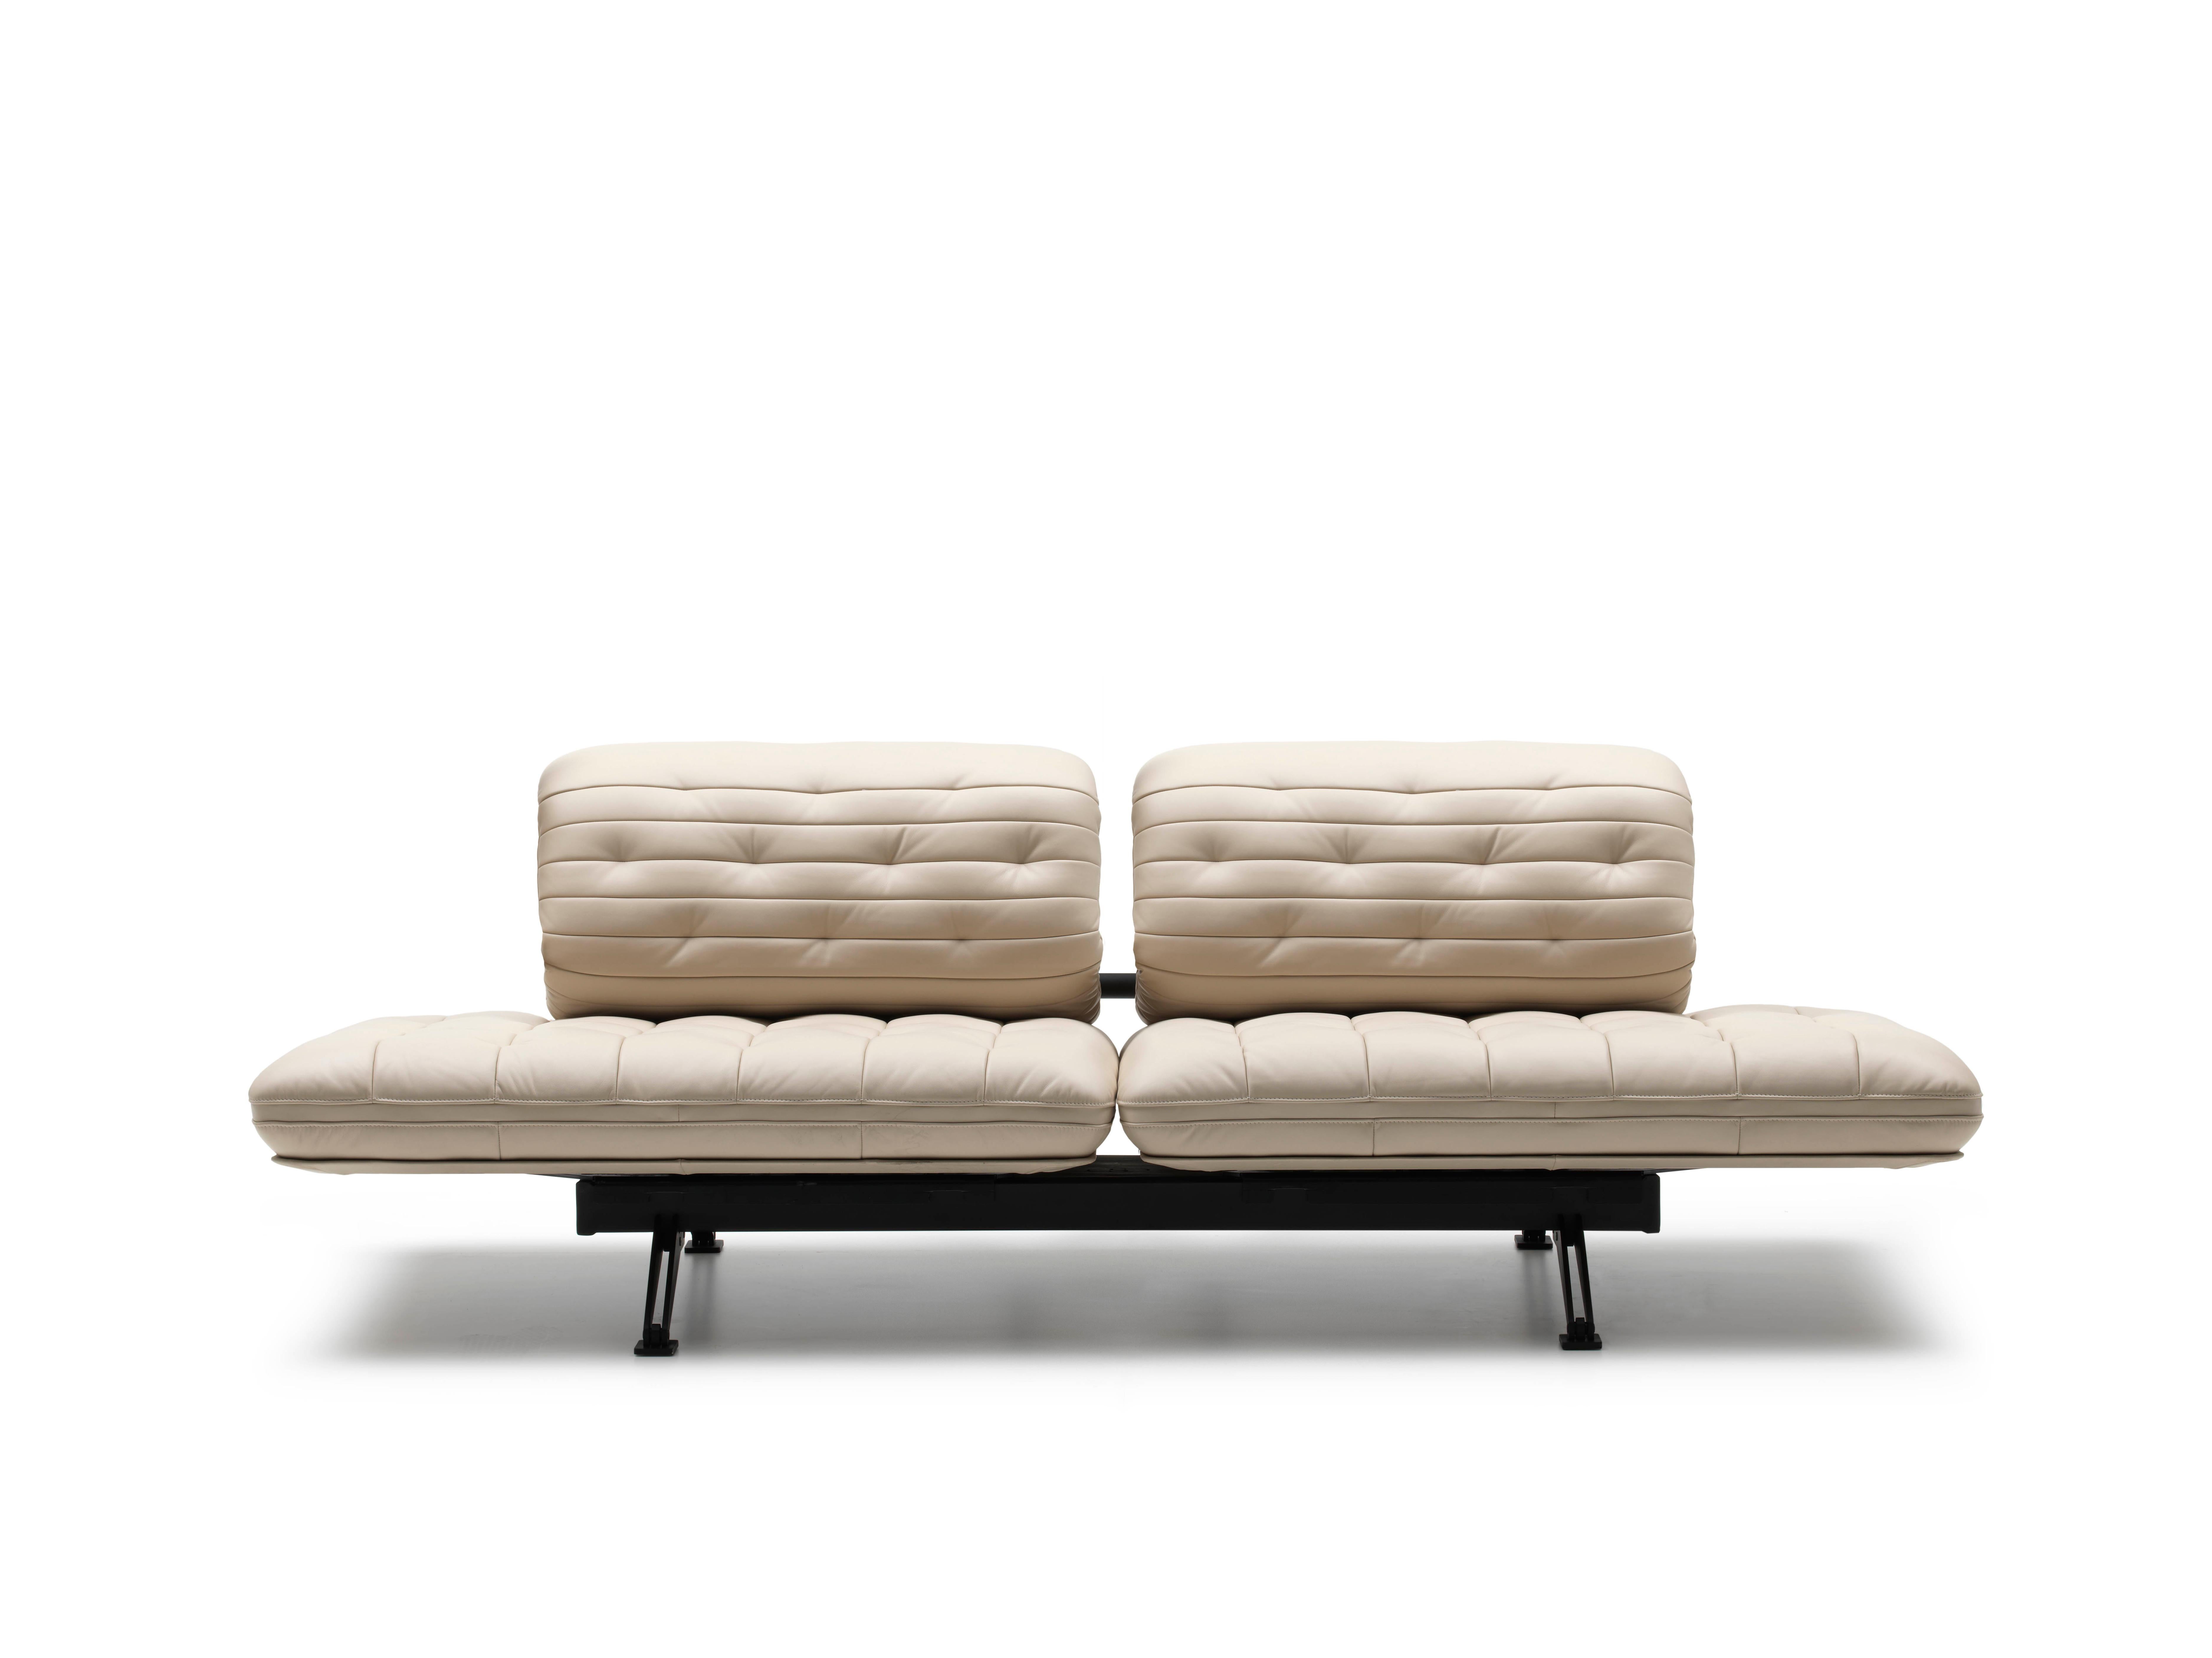 DS-490 sofa by De Sede
Design: Thomas Althaus
Dimensions: D 72 x W 240 x H 104 cm
Materials: metal, birch plywood, leather

Prices may change according to the chosen materials and size. 

A straight backrest becomes a curved